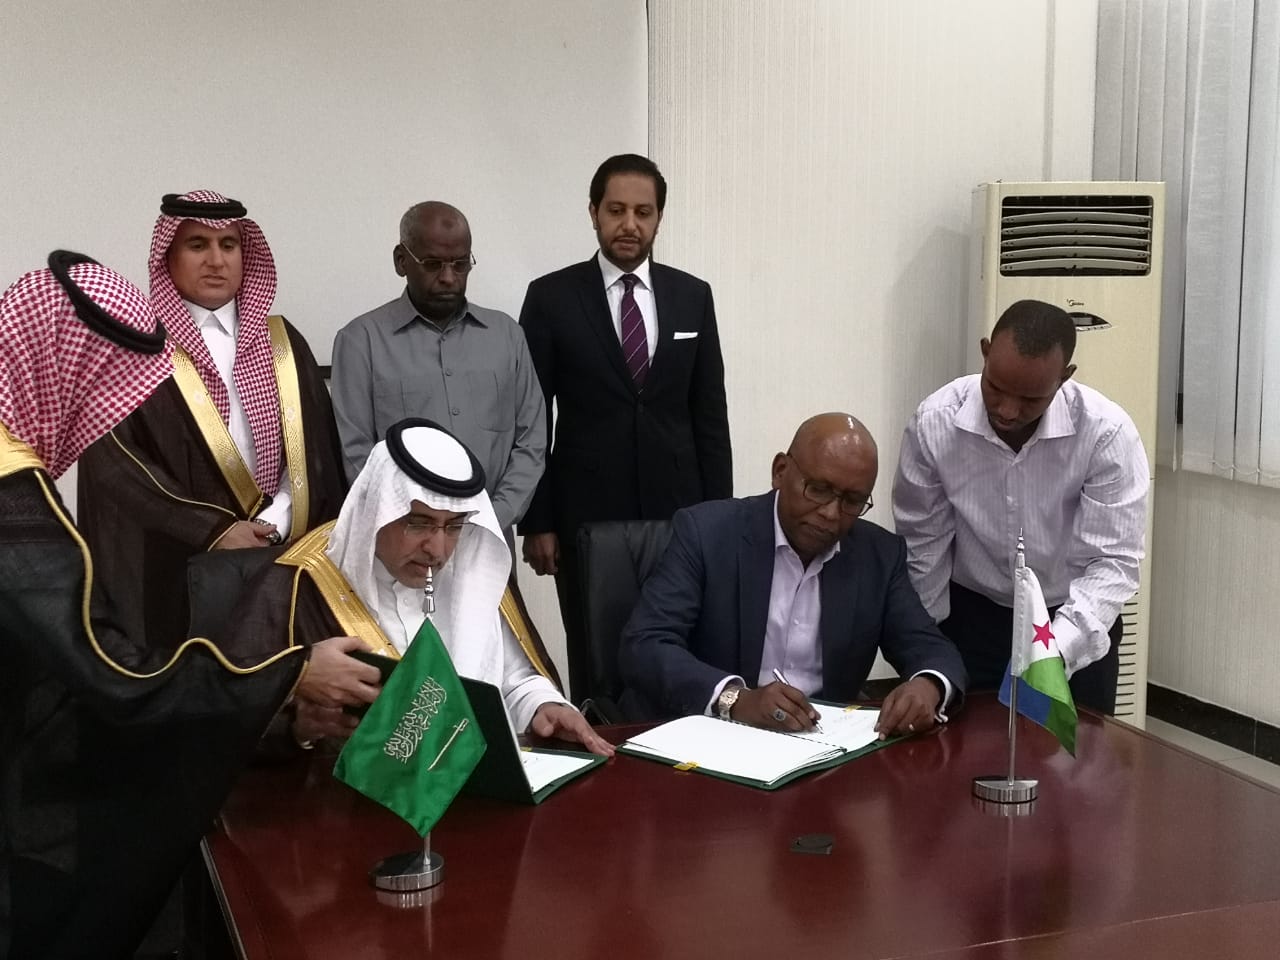 The Vice Chairman of the Saudi Fund for Development, Dr. Khalid bin Sulaiman Al Khudairy (pictured left) and the Djibouti Minister of Economy and Finance, Mr Elias Moussa Doula (right) sign a new grant agreement in the presence of the Prime Minister of Djibouti, Mr. Abdoulkader Kamil Mohamed (center back row) which will help finance new infrastructure development projects in Djibouti. (Photo : AETOSWire)